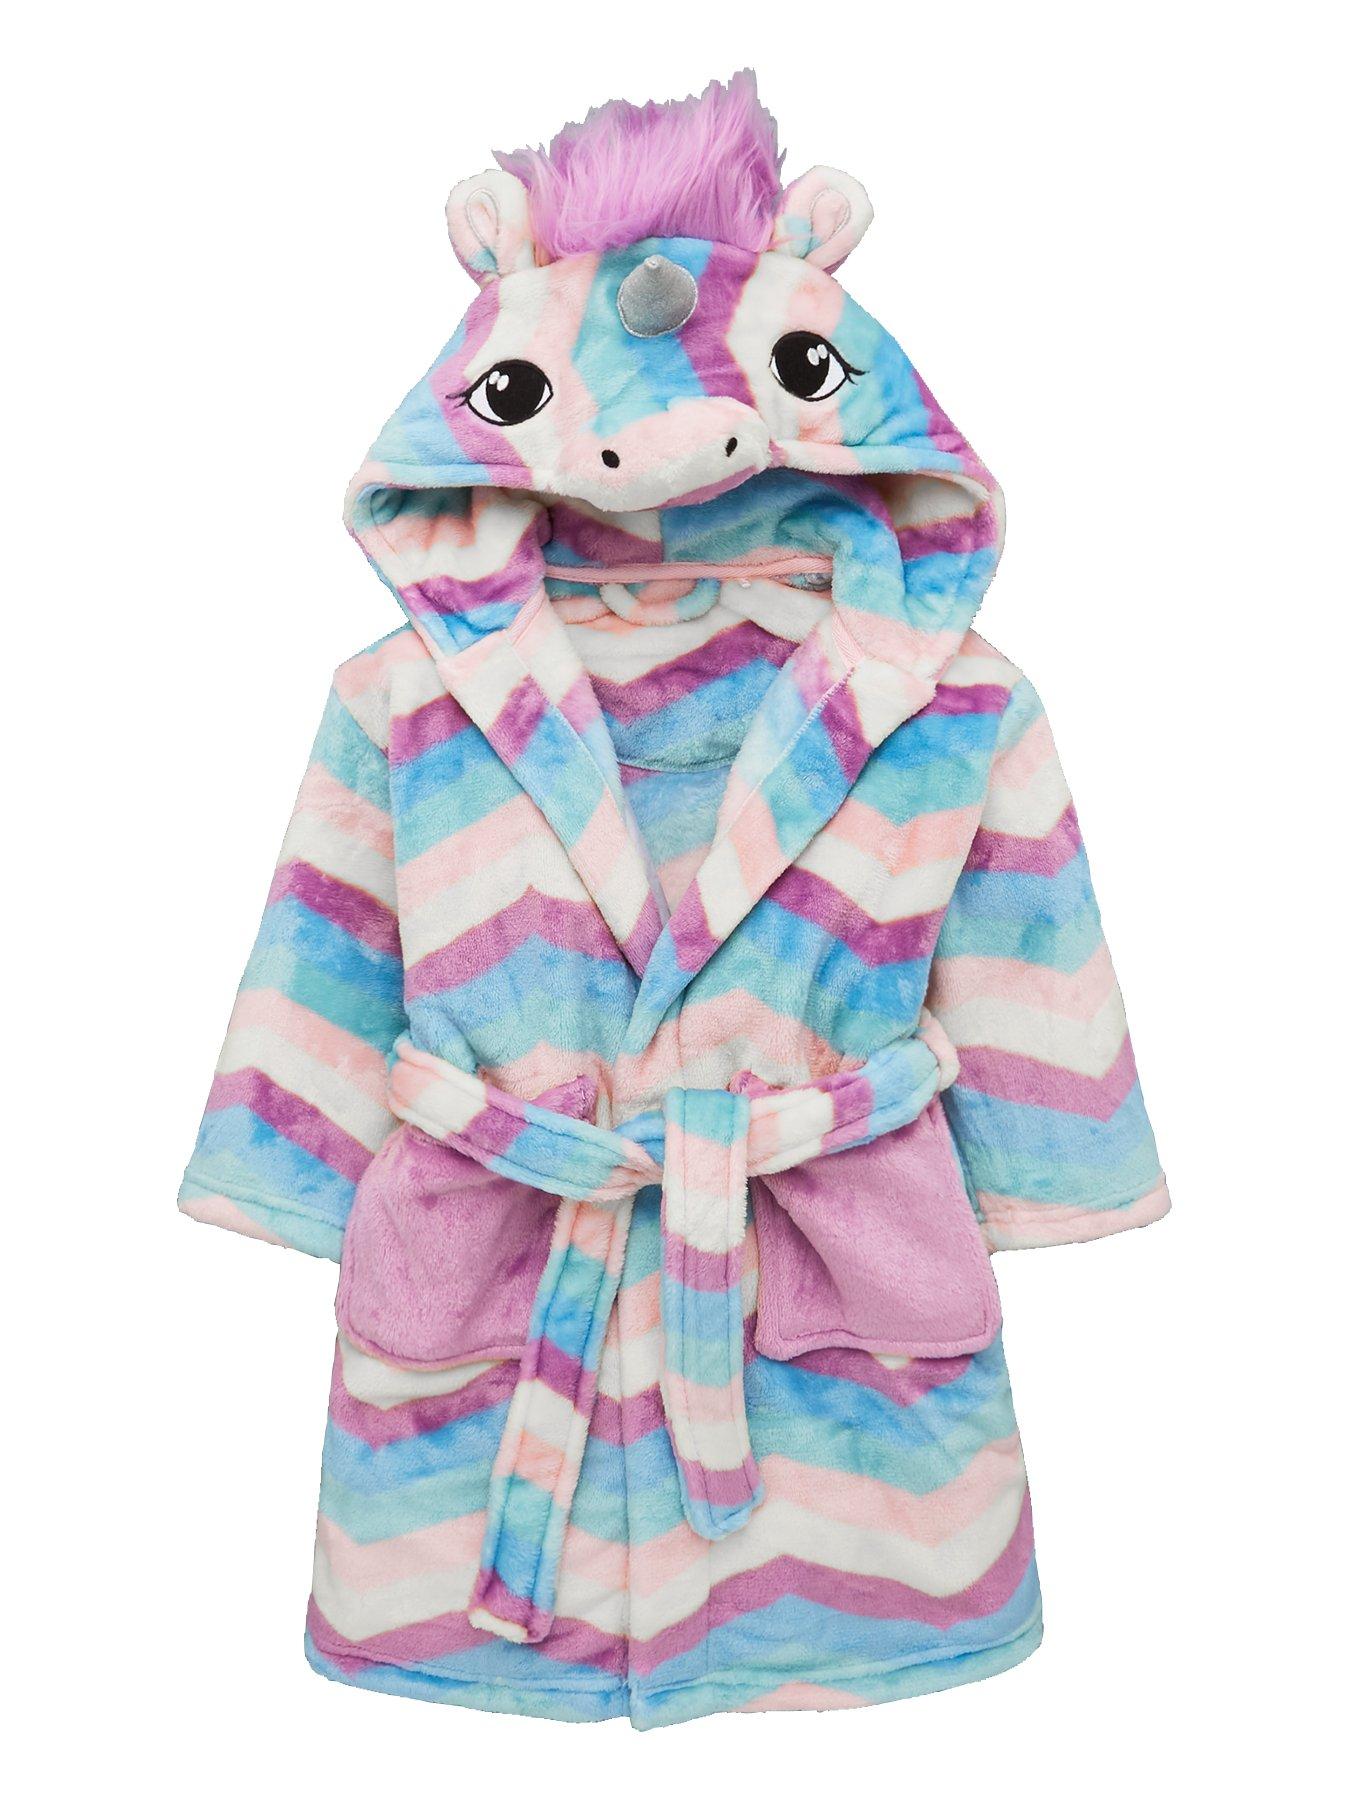 unicorn dressing gown baby